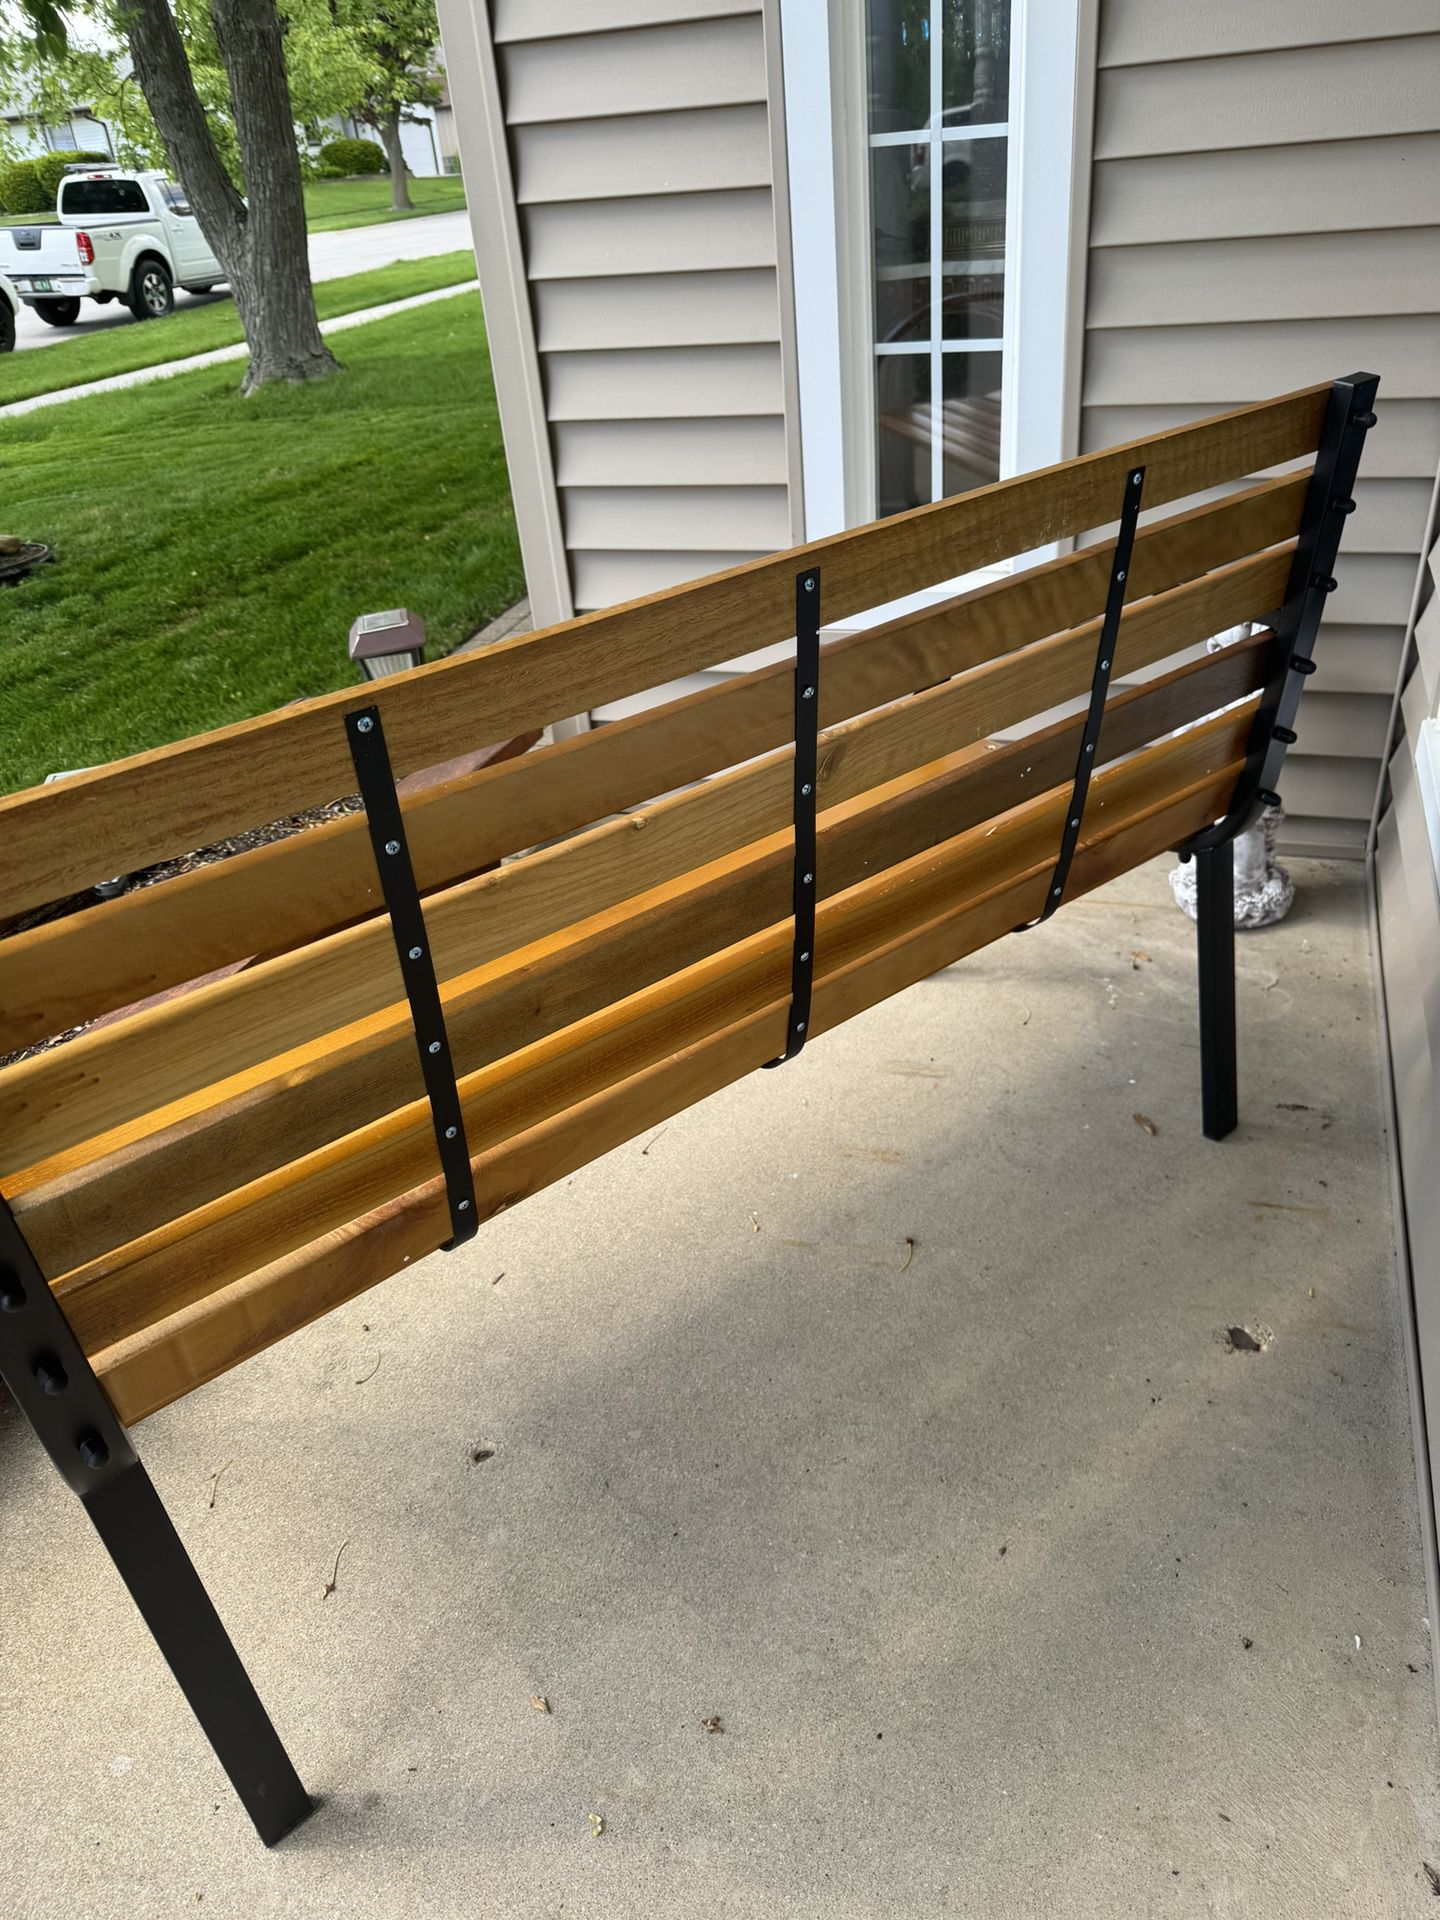 Decorative Steel And Wood Bench